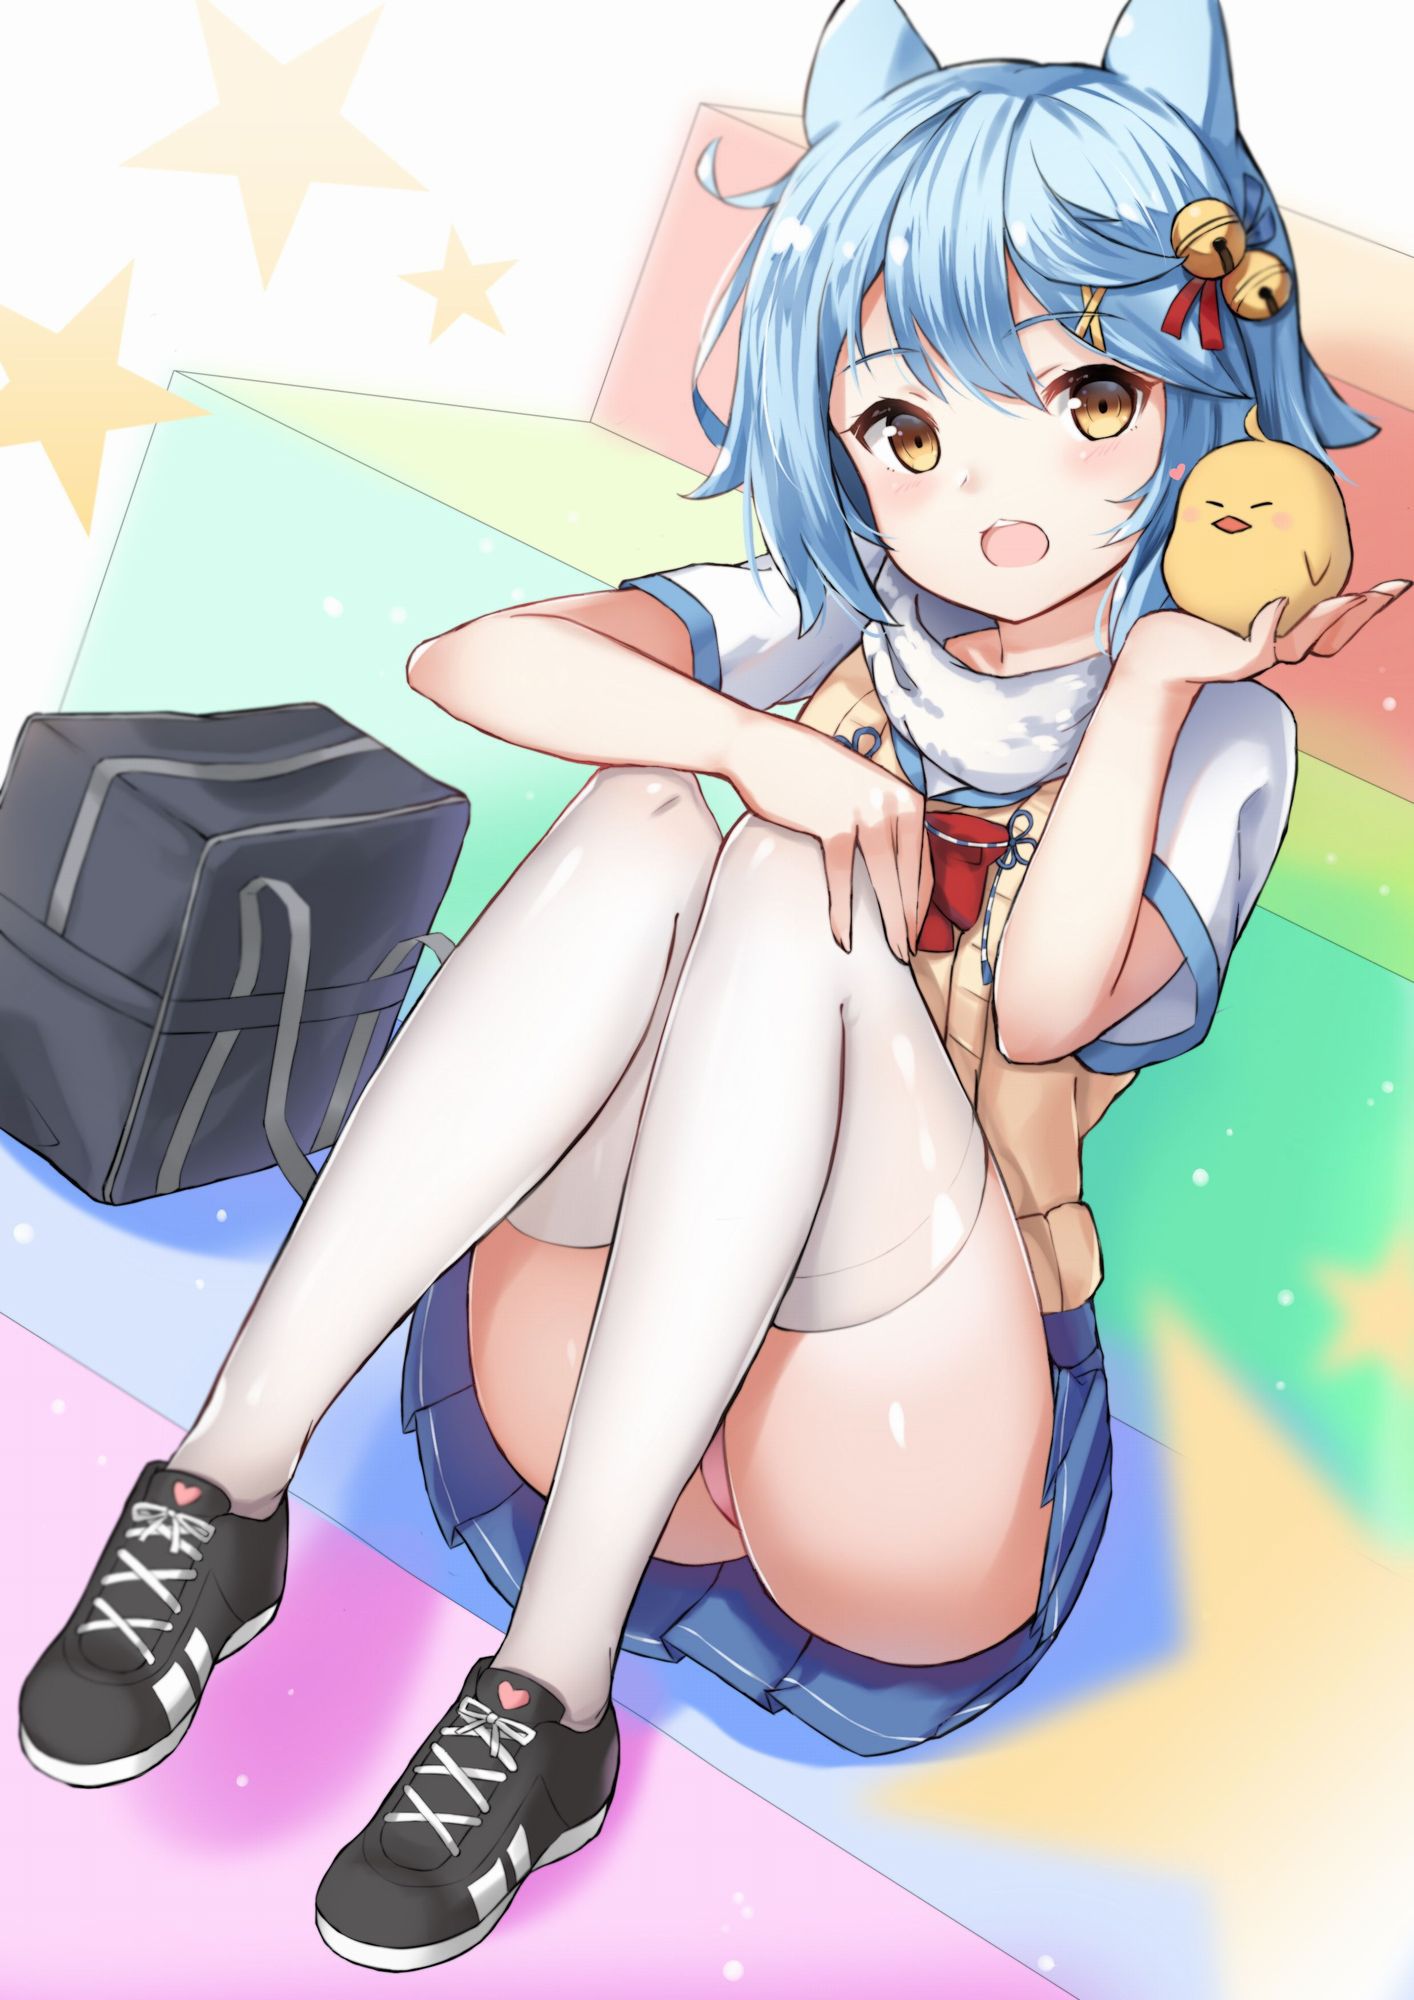 [2nd] Secondary erotic image of a girl with blue or light blue hair Part 18 [ blue hair ] 26